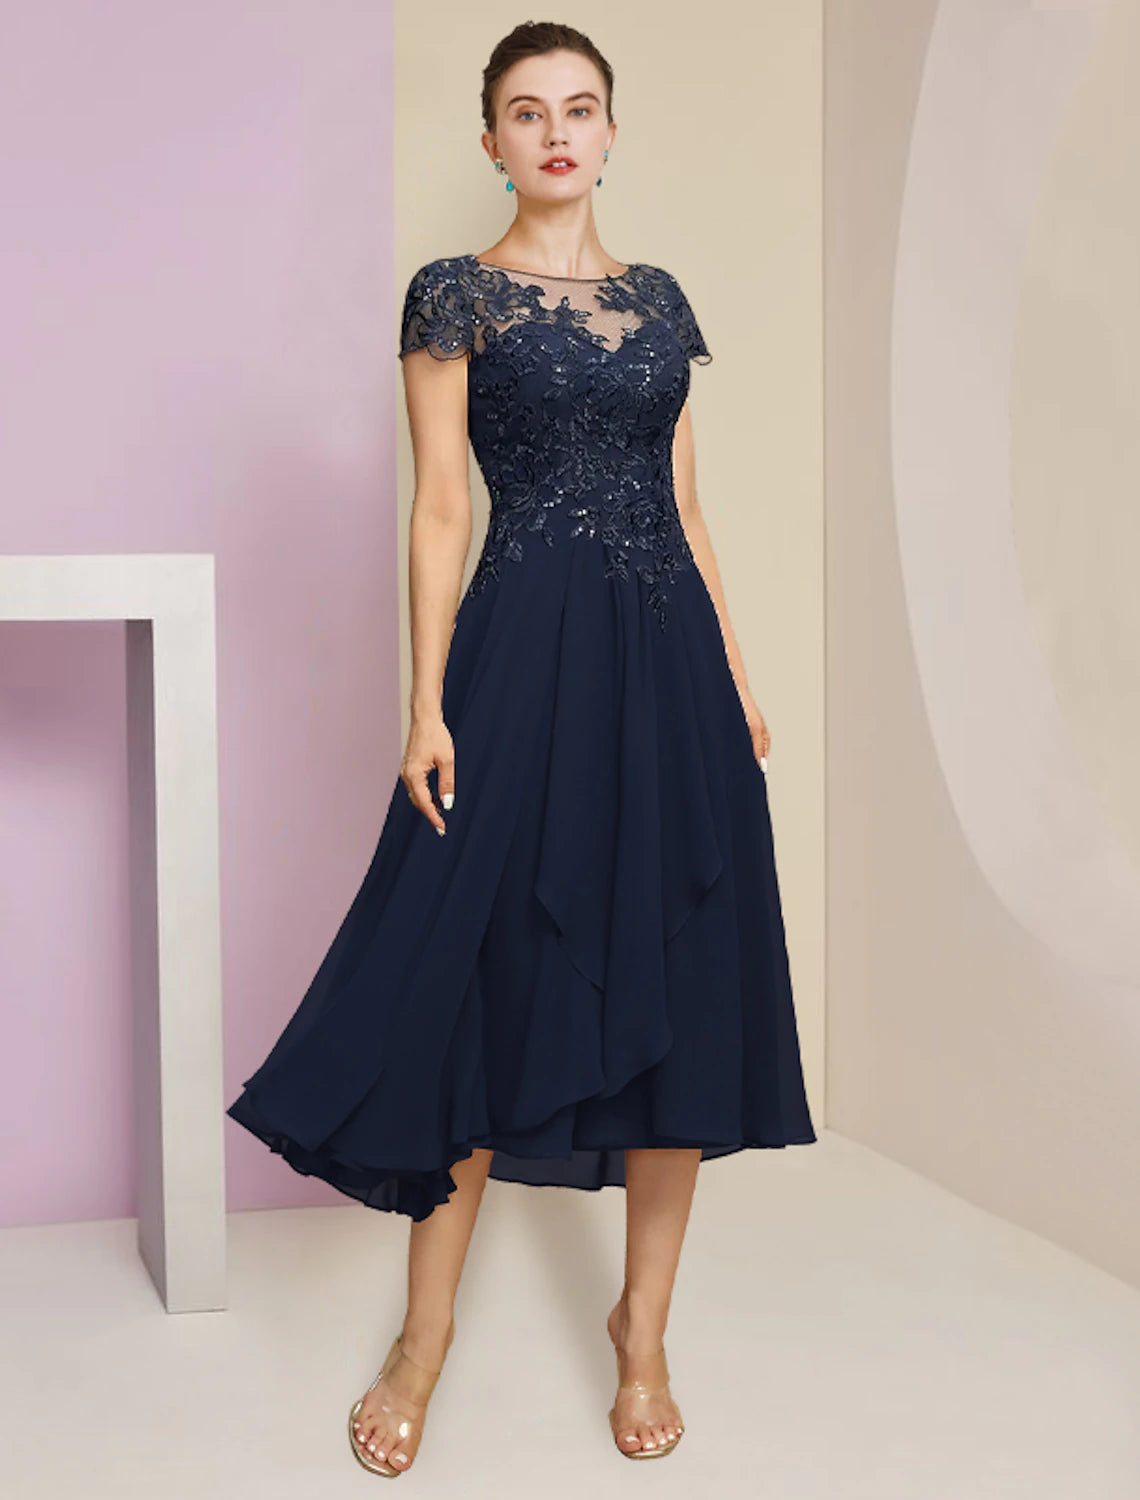 Two Piece A-Line Mother of the Bride Dress Formal Wedding Guest Elegant Scoop Neck Tea Length Chiffon Lace Short Sleeve Fall Wrap Included with Pleats Sequin Appliques